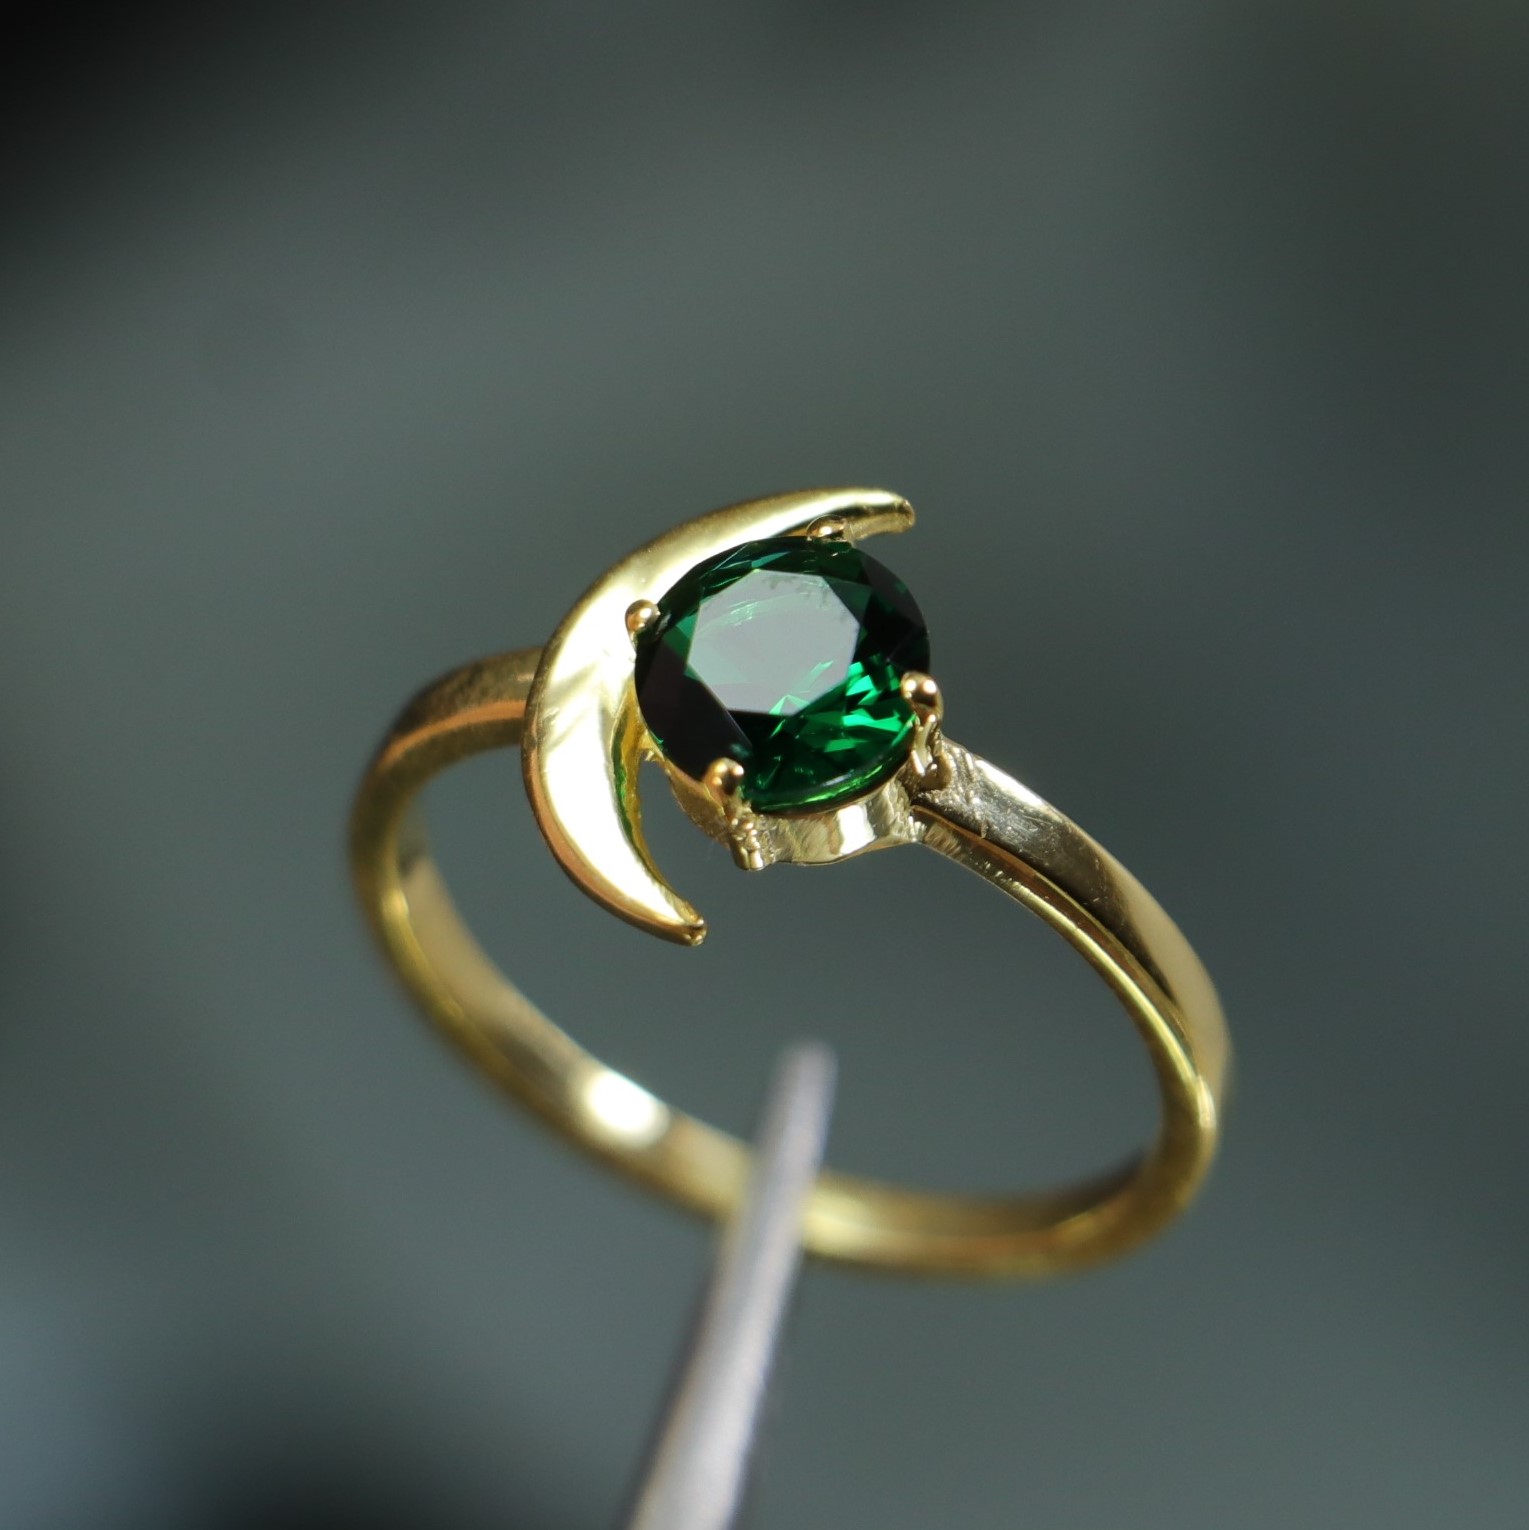 Crescent Moon Lab. Emerald 925 Sterling Silver Gold Plated Ring